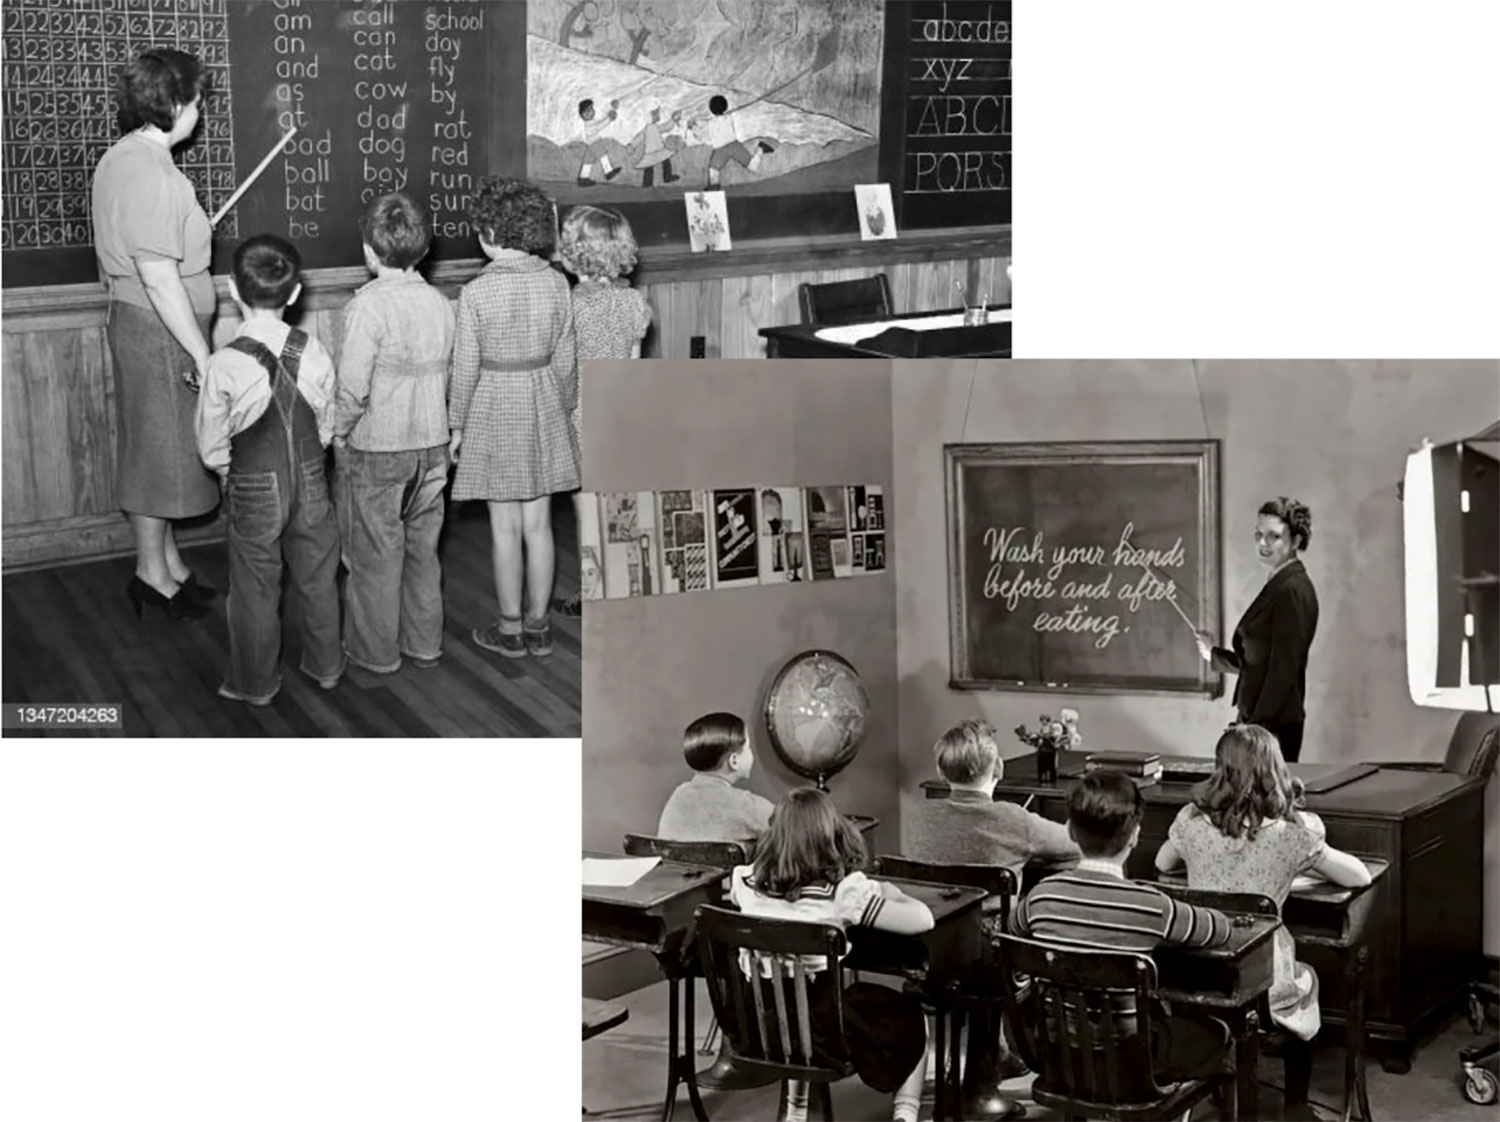 Two black and white archival photos of reading lessons at the blackboard